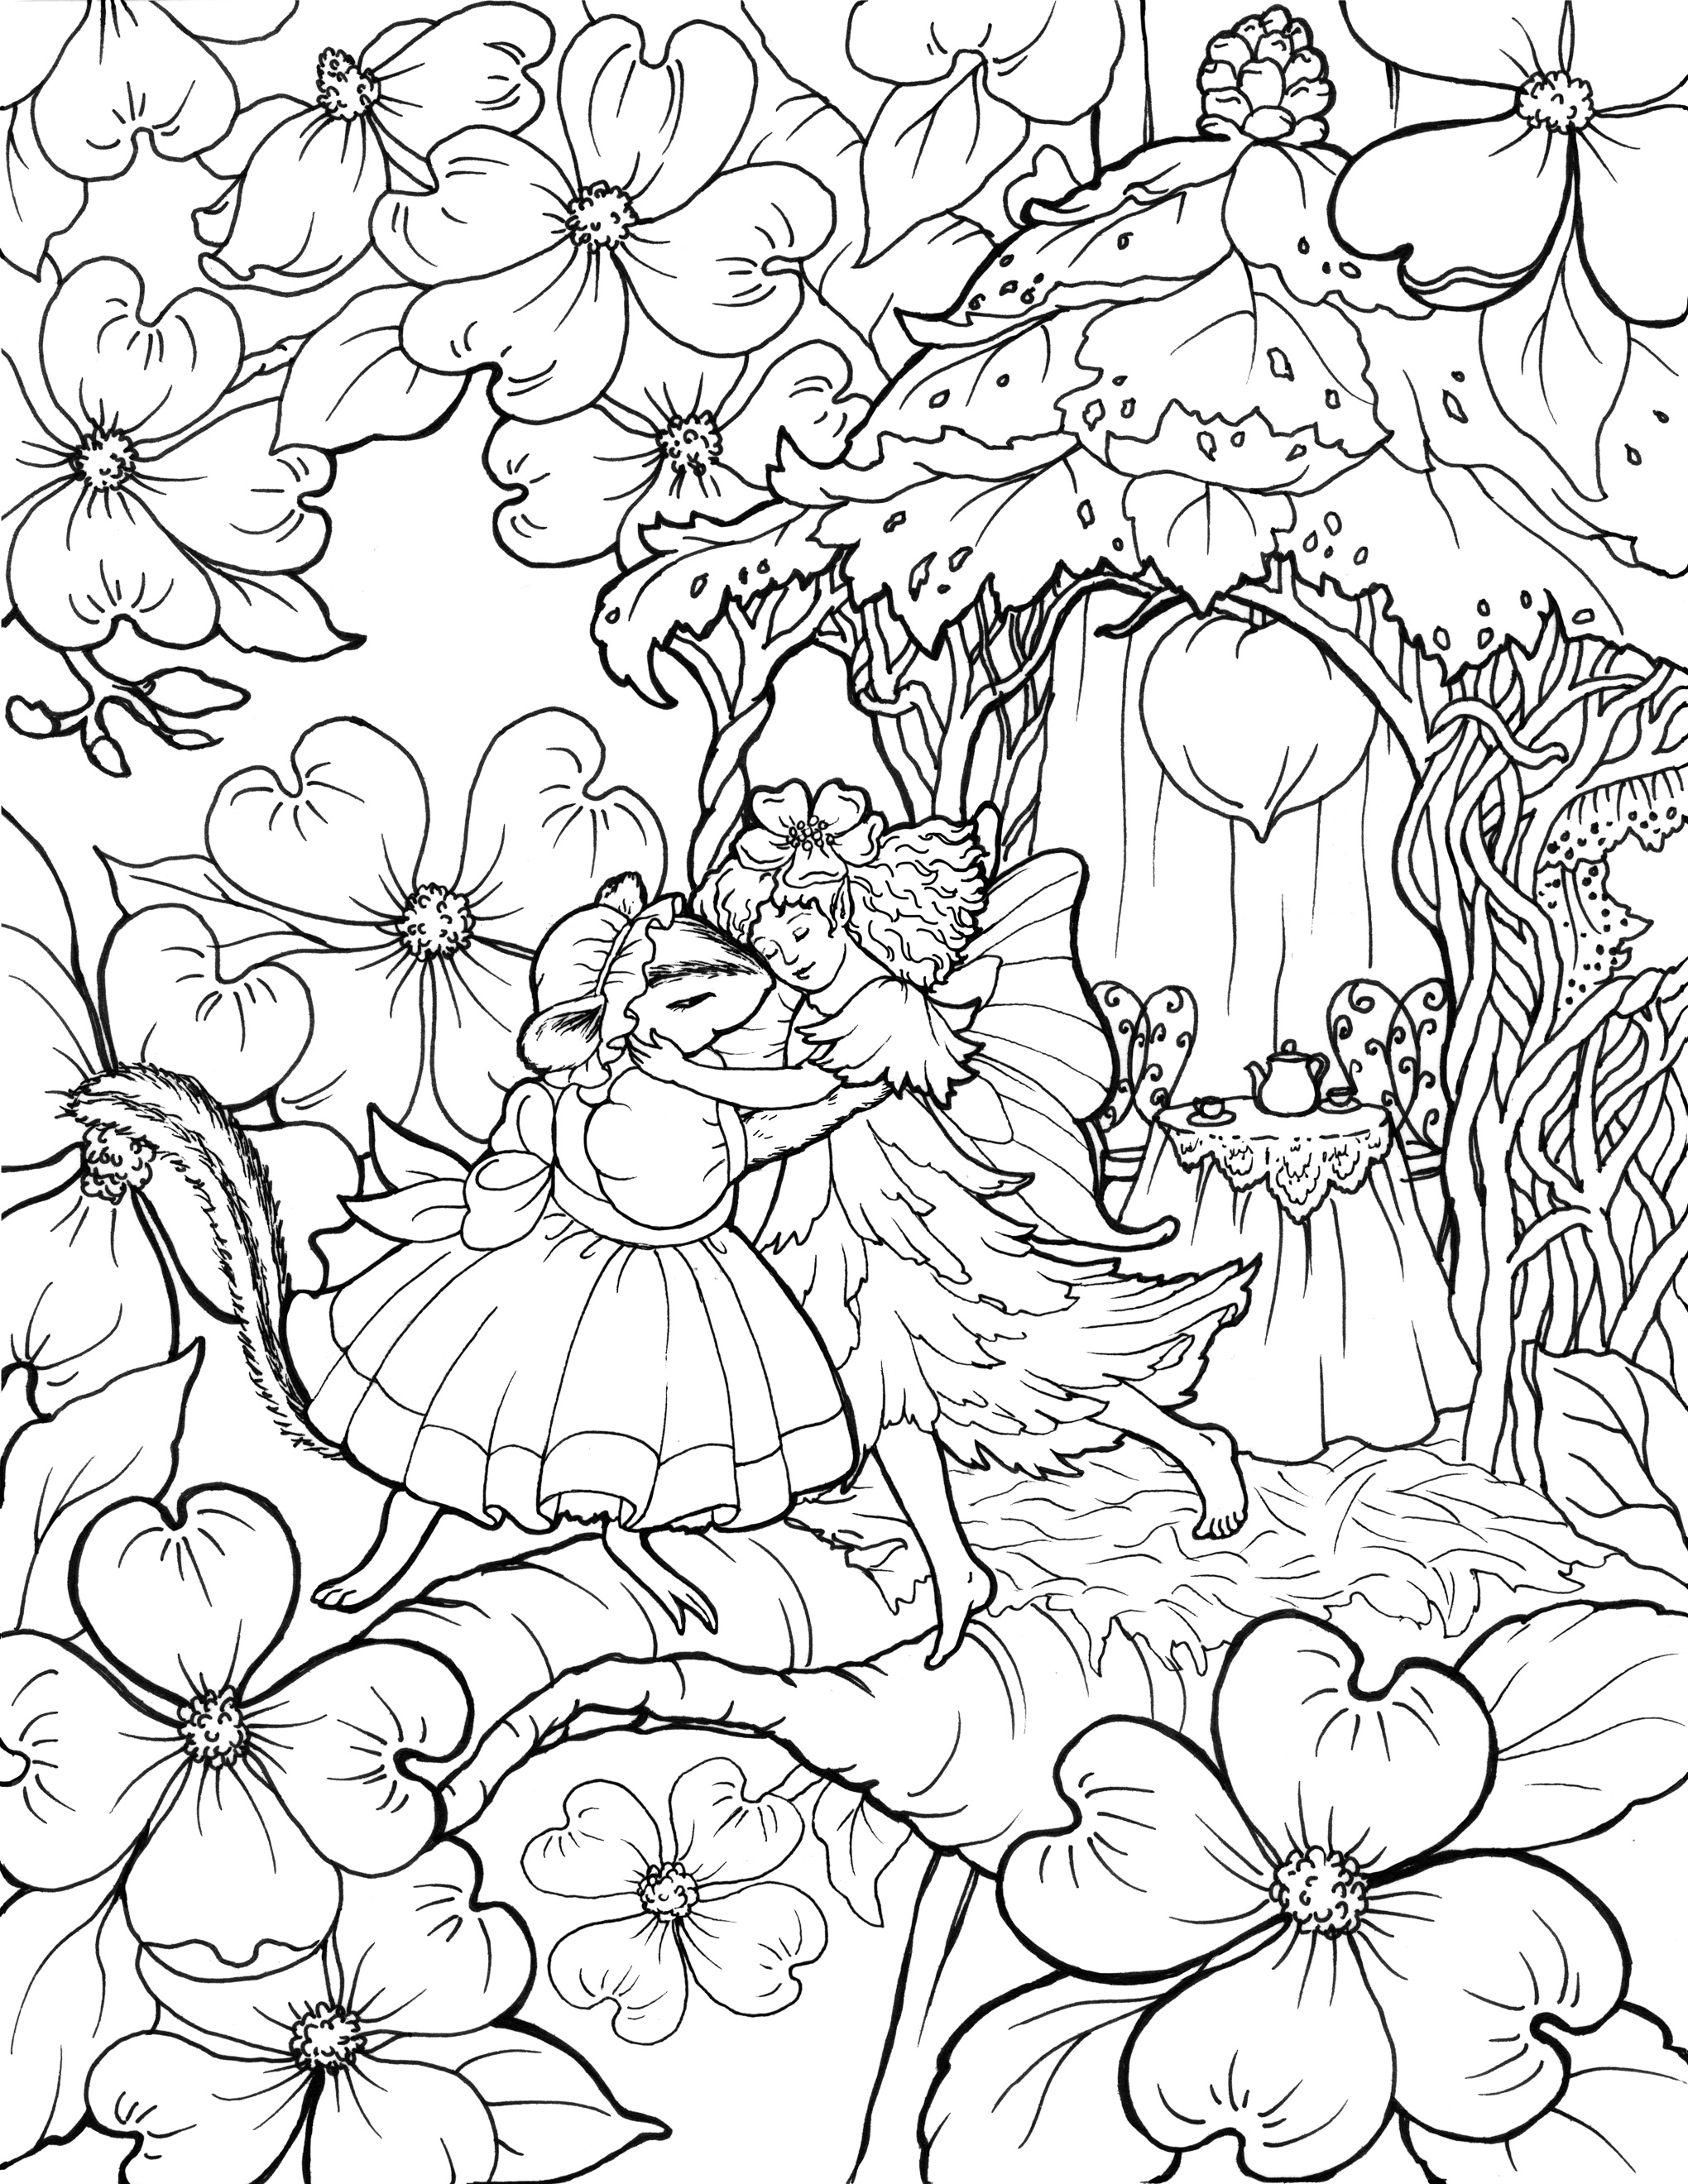 Printable Adult Coloring Pages Fairies Coloring Pages